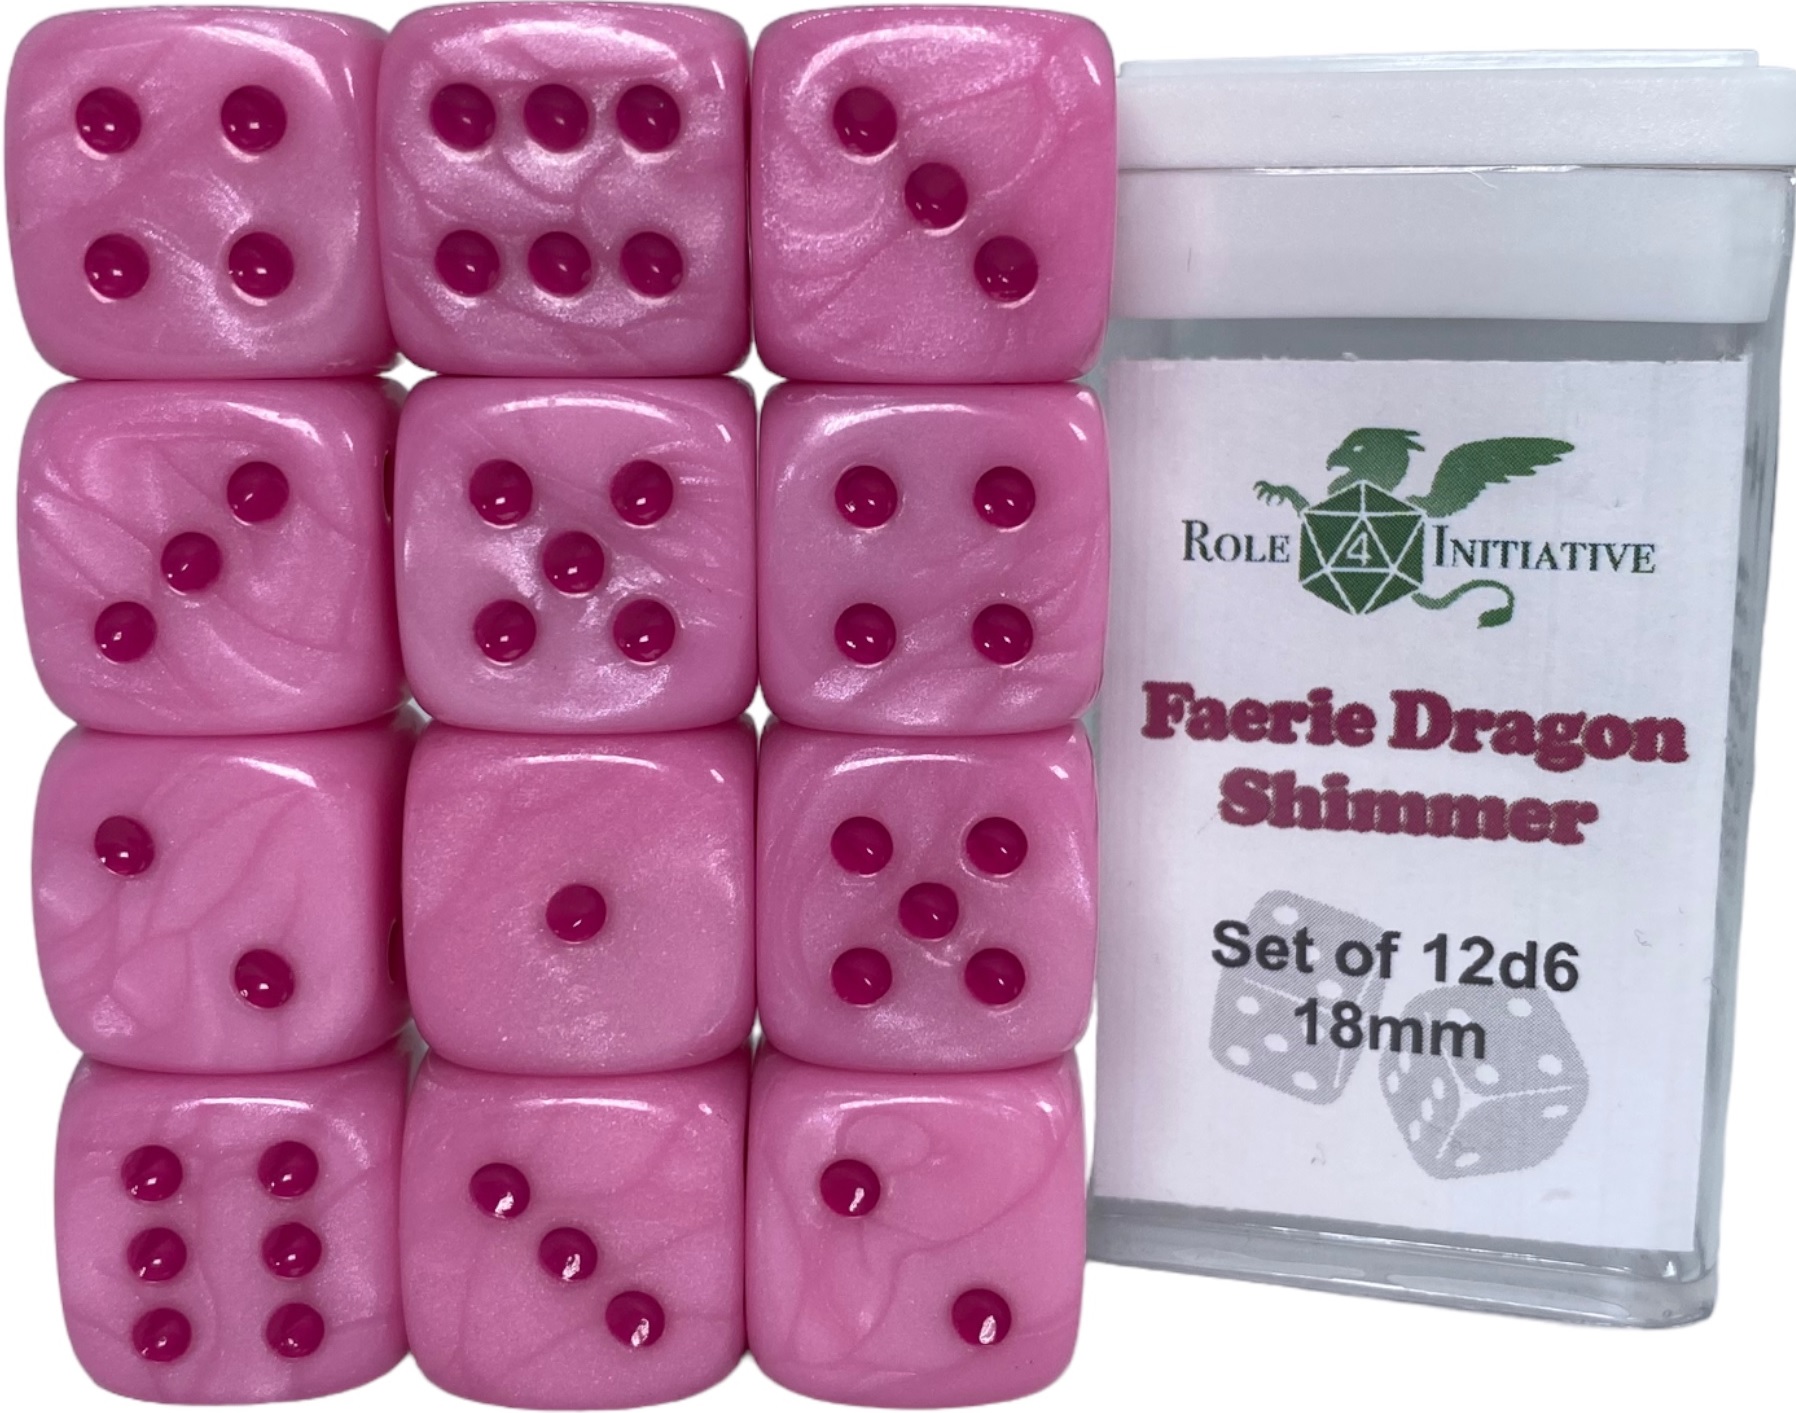 Role 4 Initiative: 12 D6 Pips Dice Set: Faerie Dragon Shimmer 18MM 